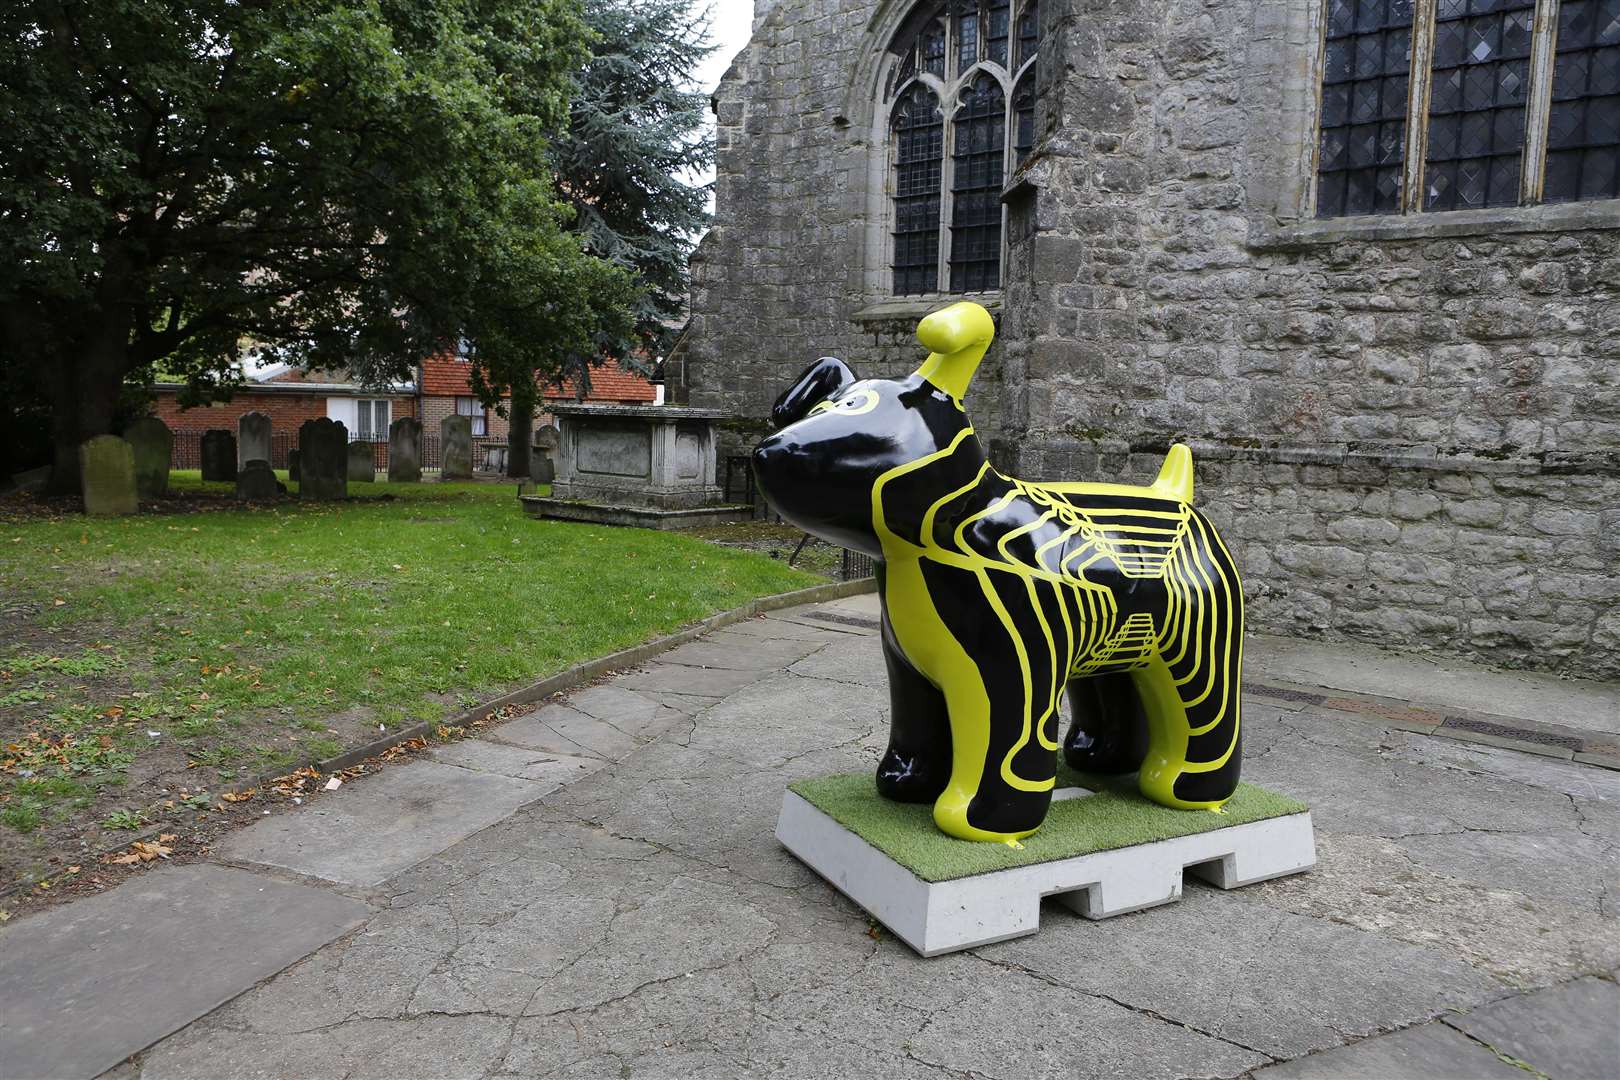 The Infinity Dog was previously in St Mary's churchyard